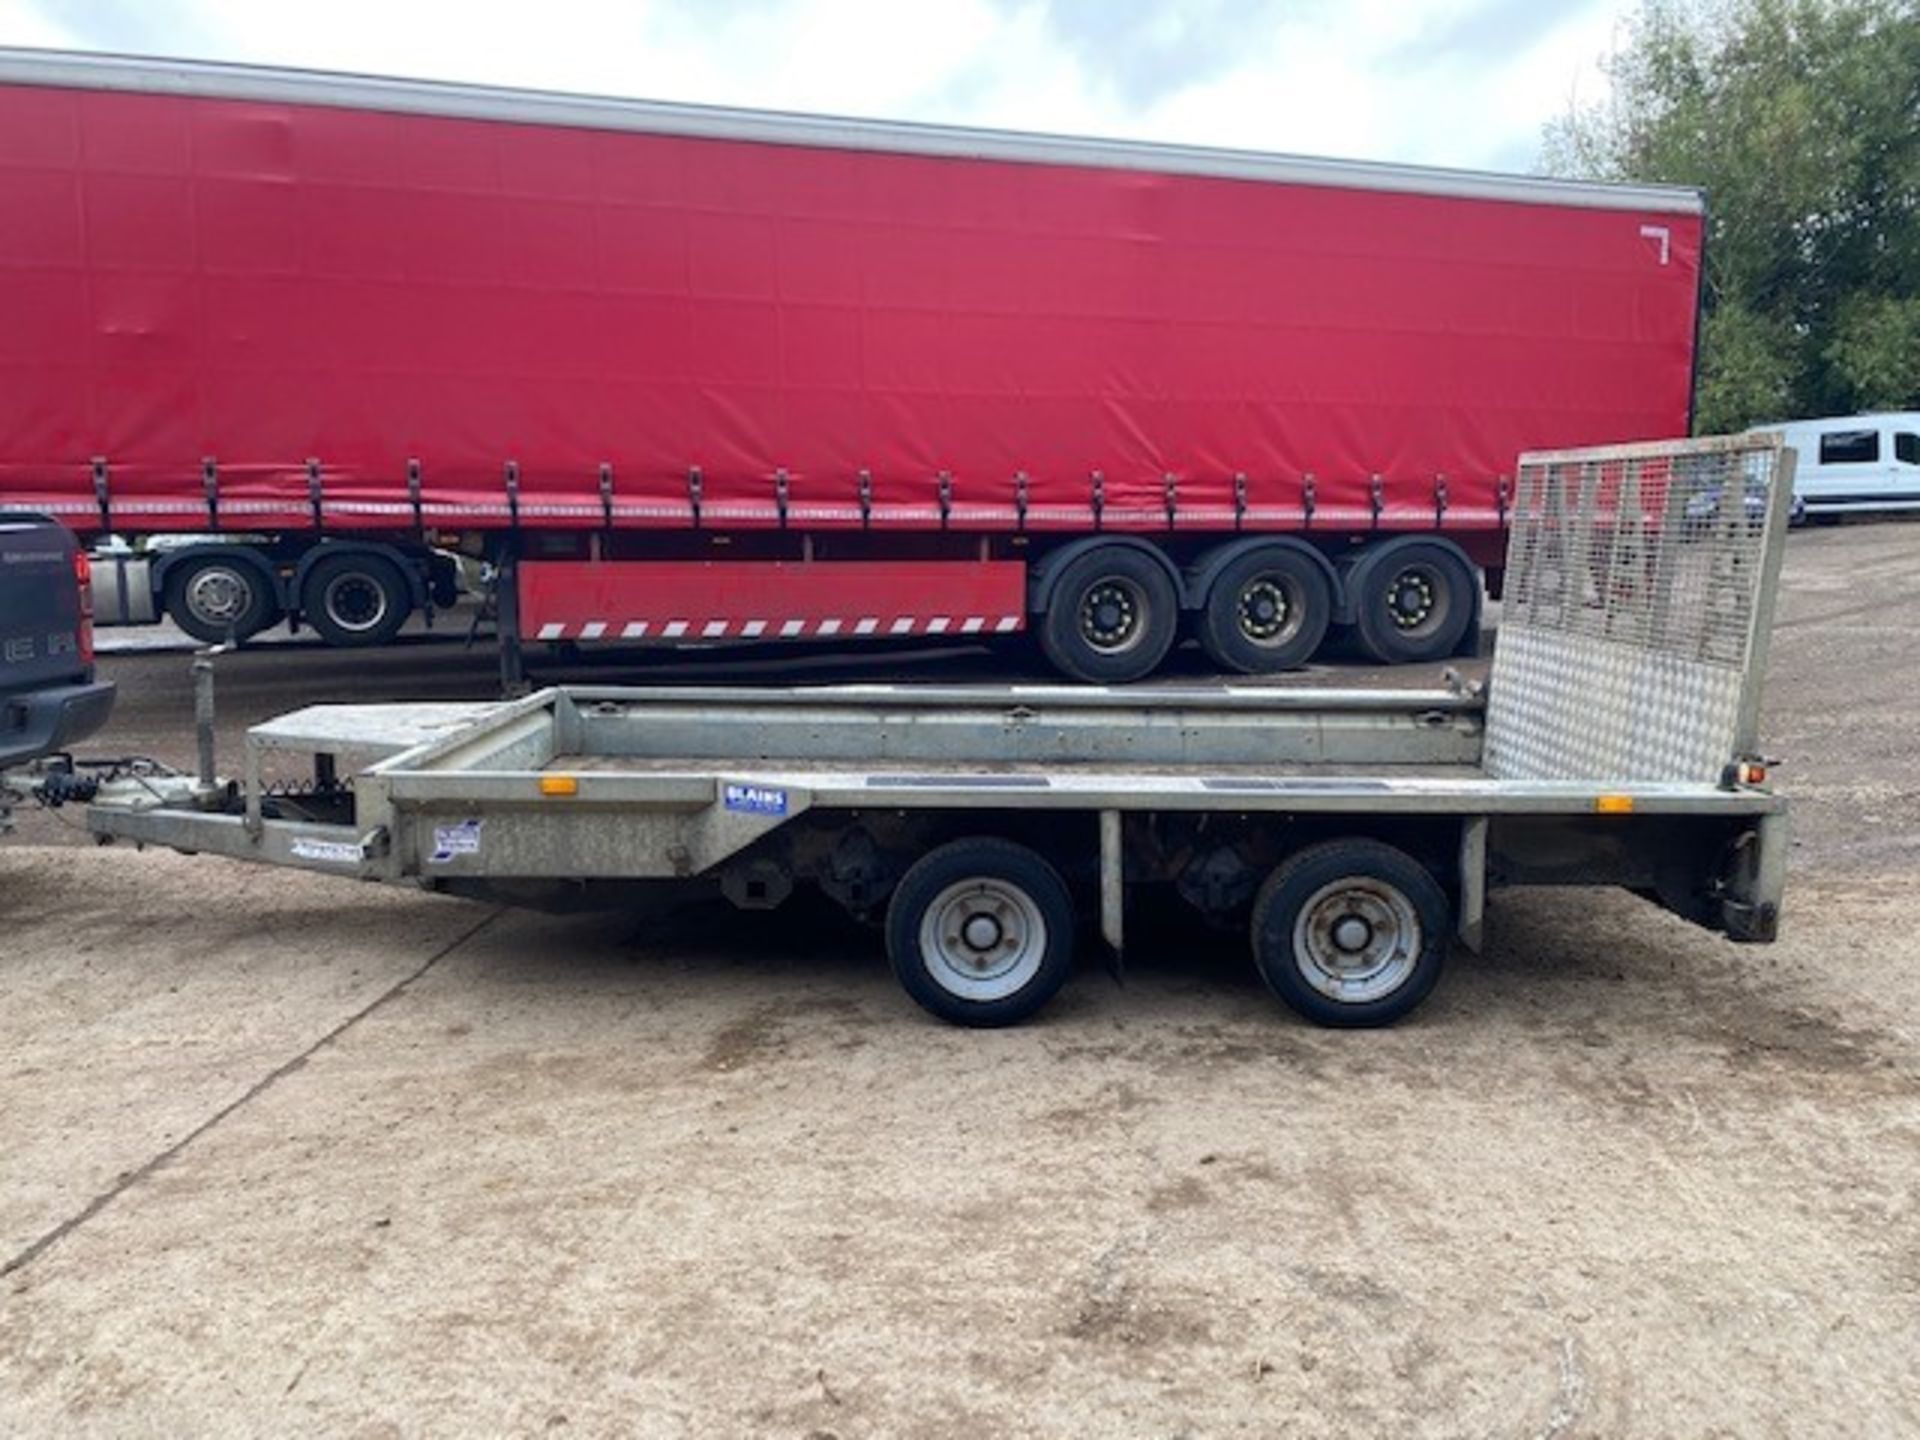 Ifor Williams 12 x 6 Plant Trailer, One Owner From New, Ball Hitch, Good Trailer All Round*PLUS VAT* - Image 2 of 10